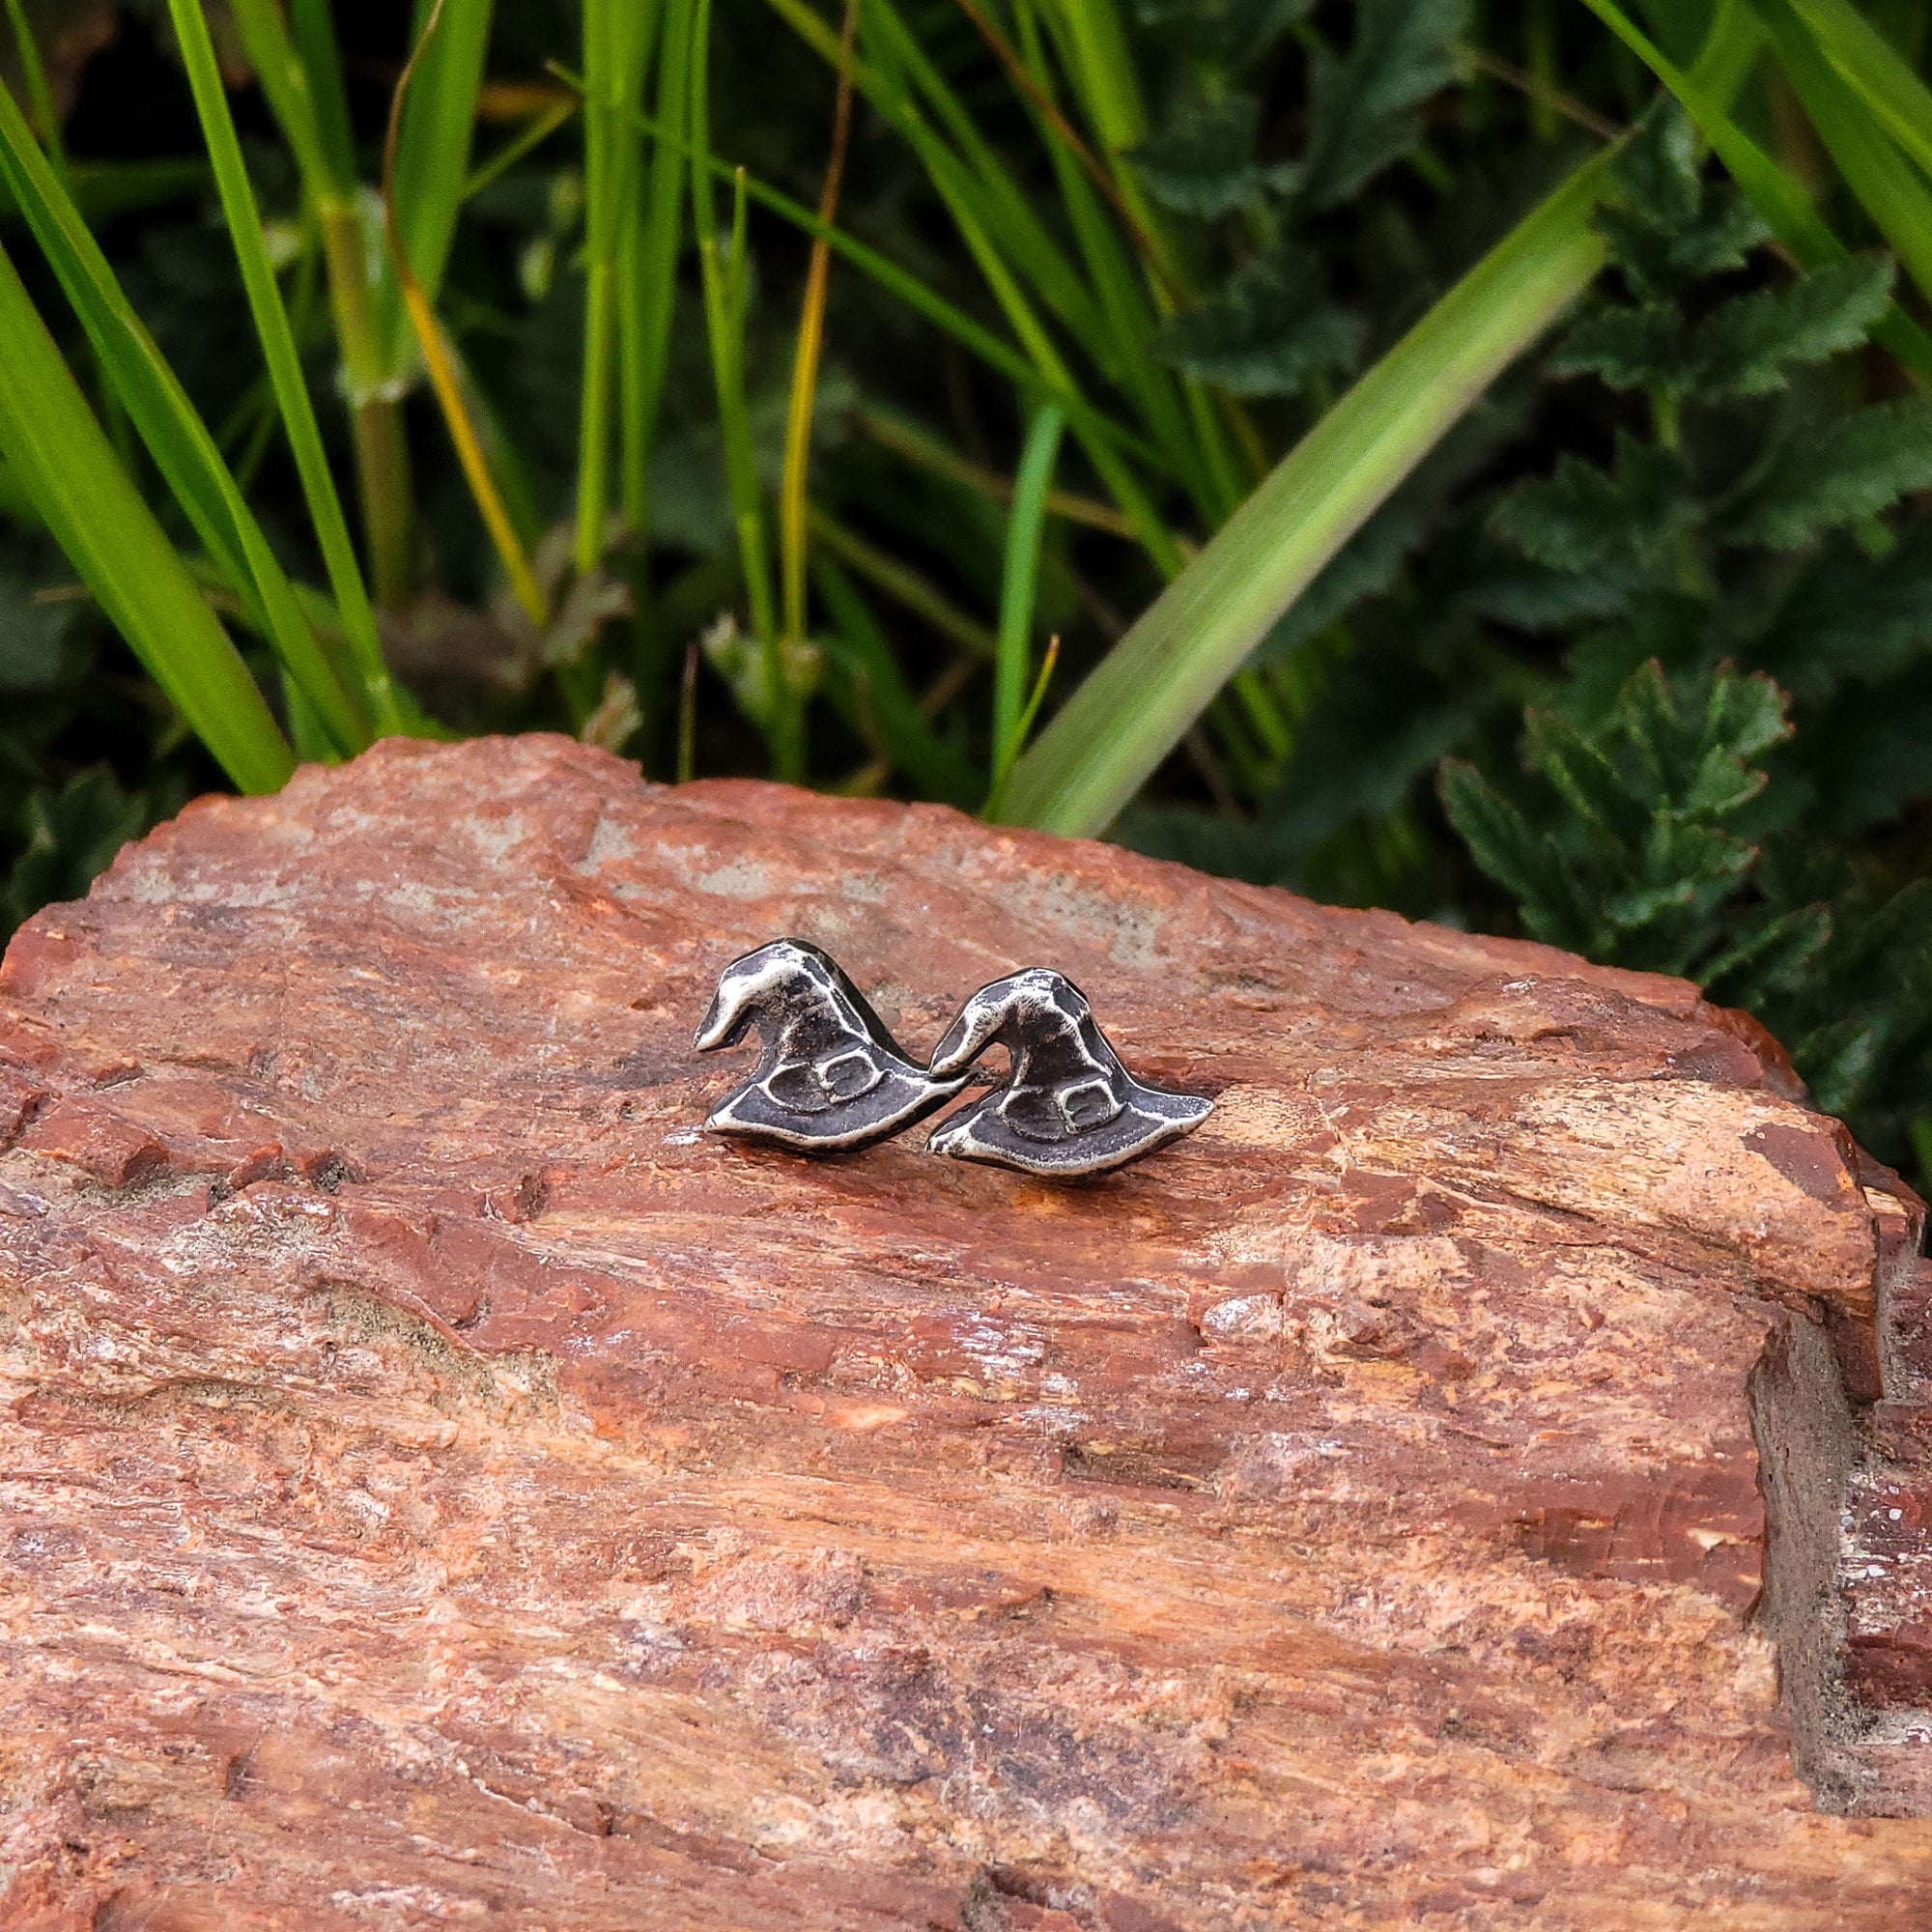 A pair of handmade sterling silver stud earrings in the shape of witch hats are displayed on a piece of wood, with green leaves in the background. The intricate details of the hat design are skillfully crafted, creating a whimsical and spooky look.